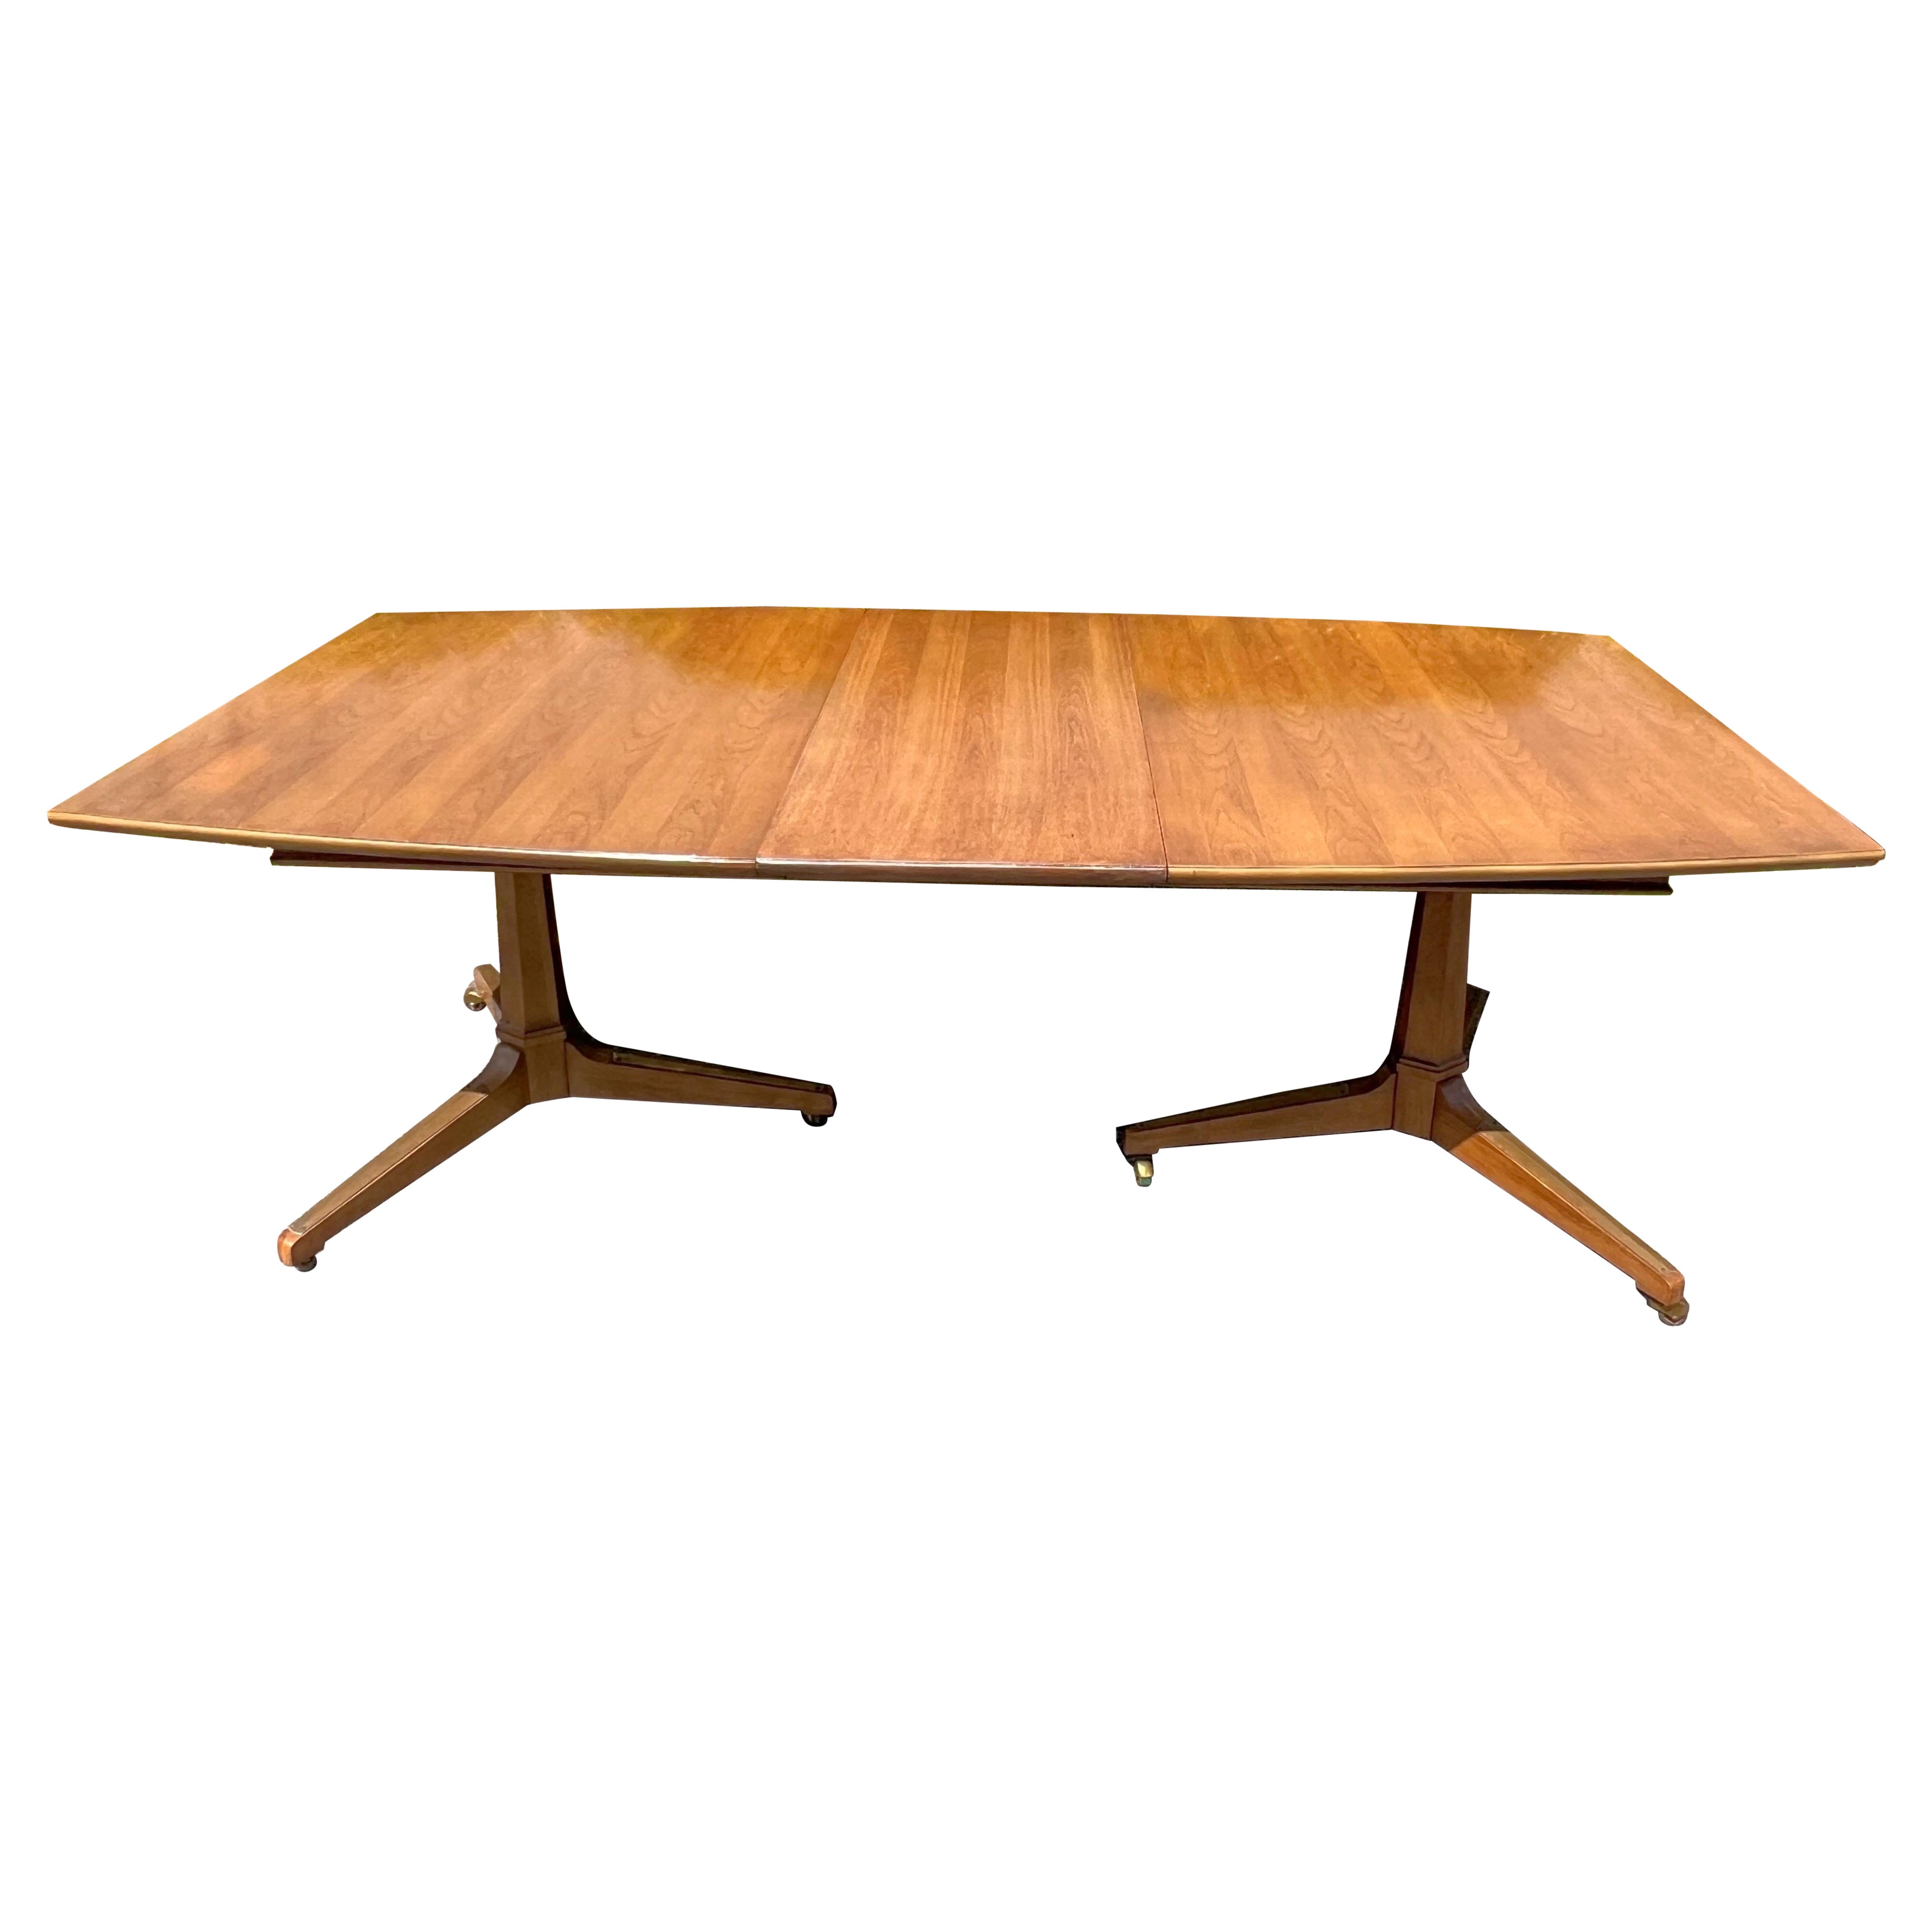 Mid-20th Century Walnut and Brass Dining Table